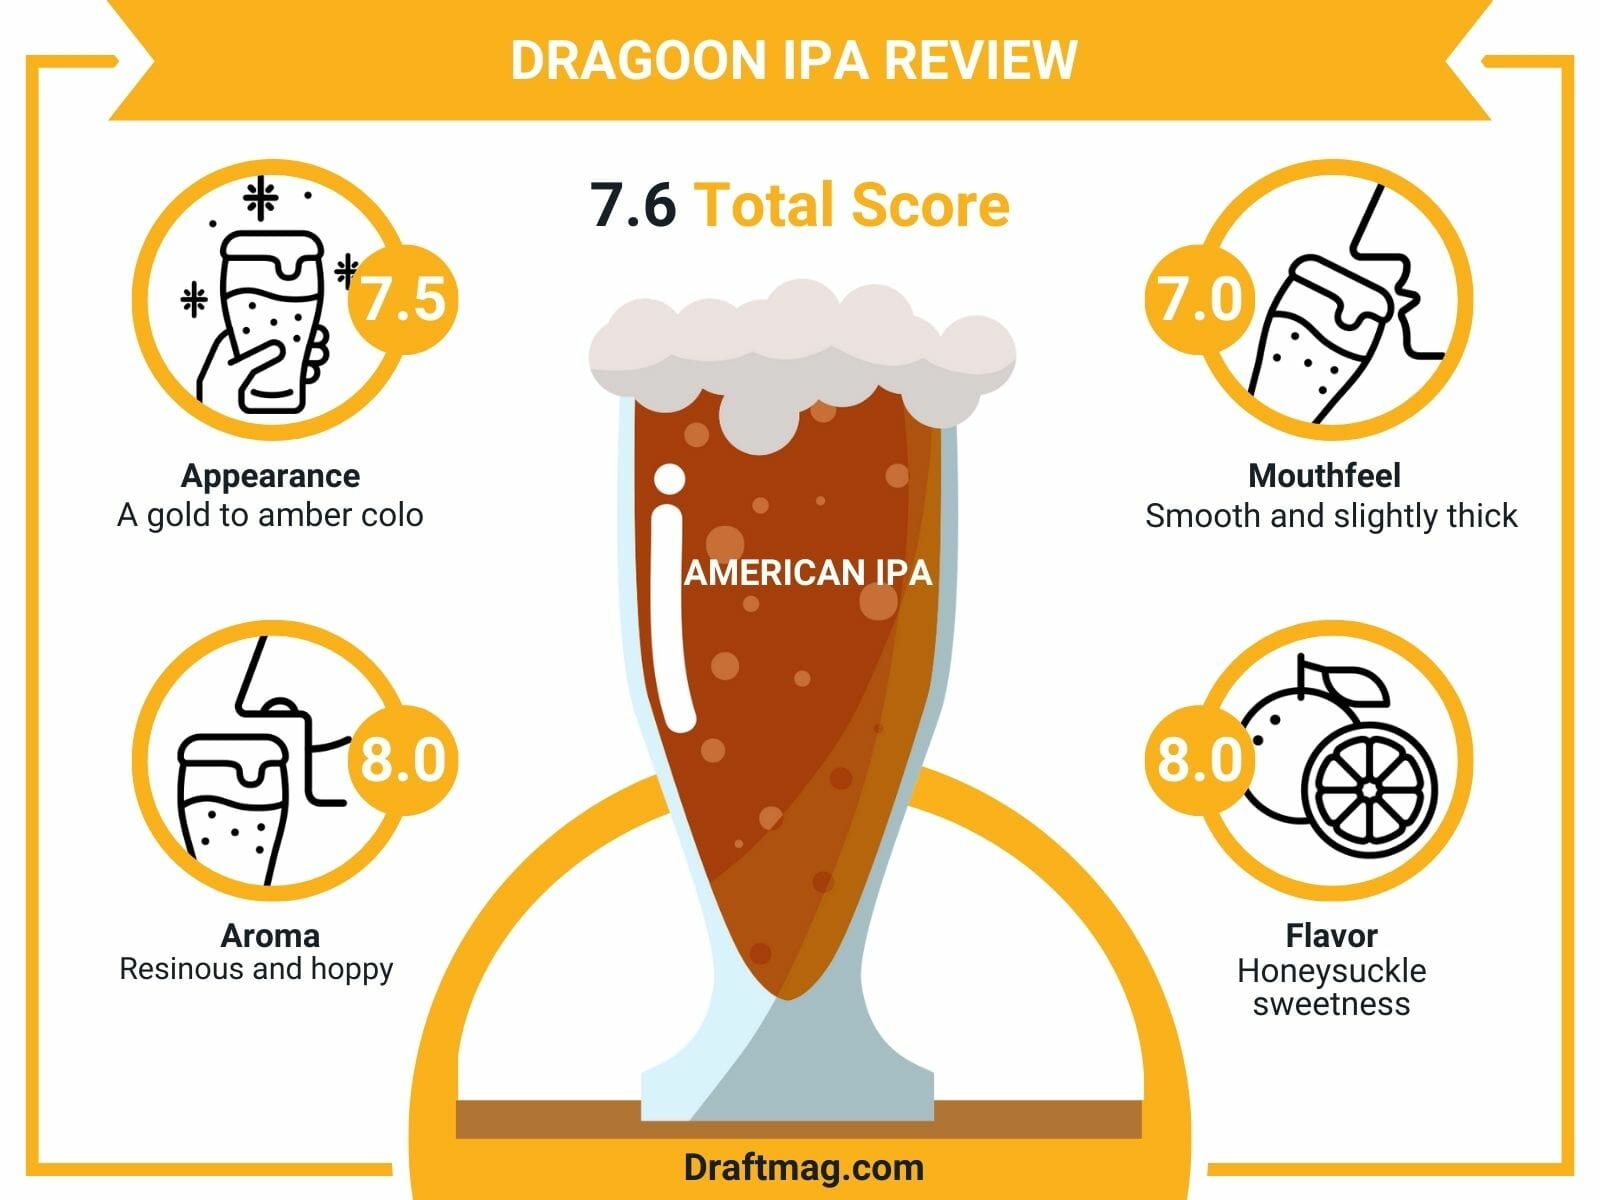 Dragoon IPA Review Infographic